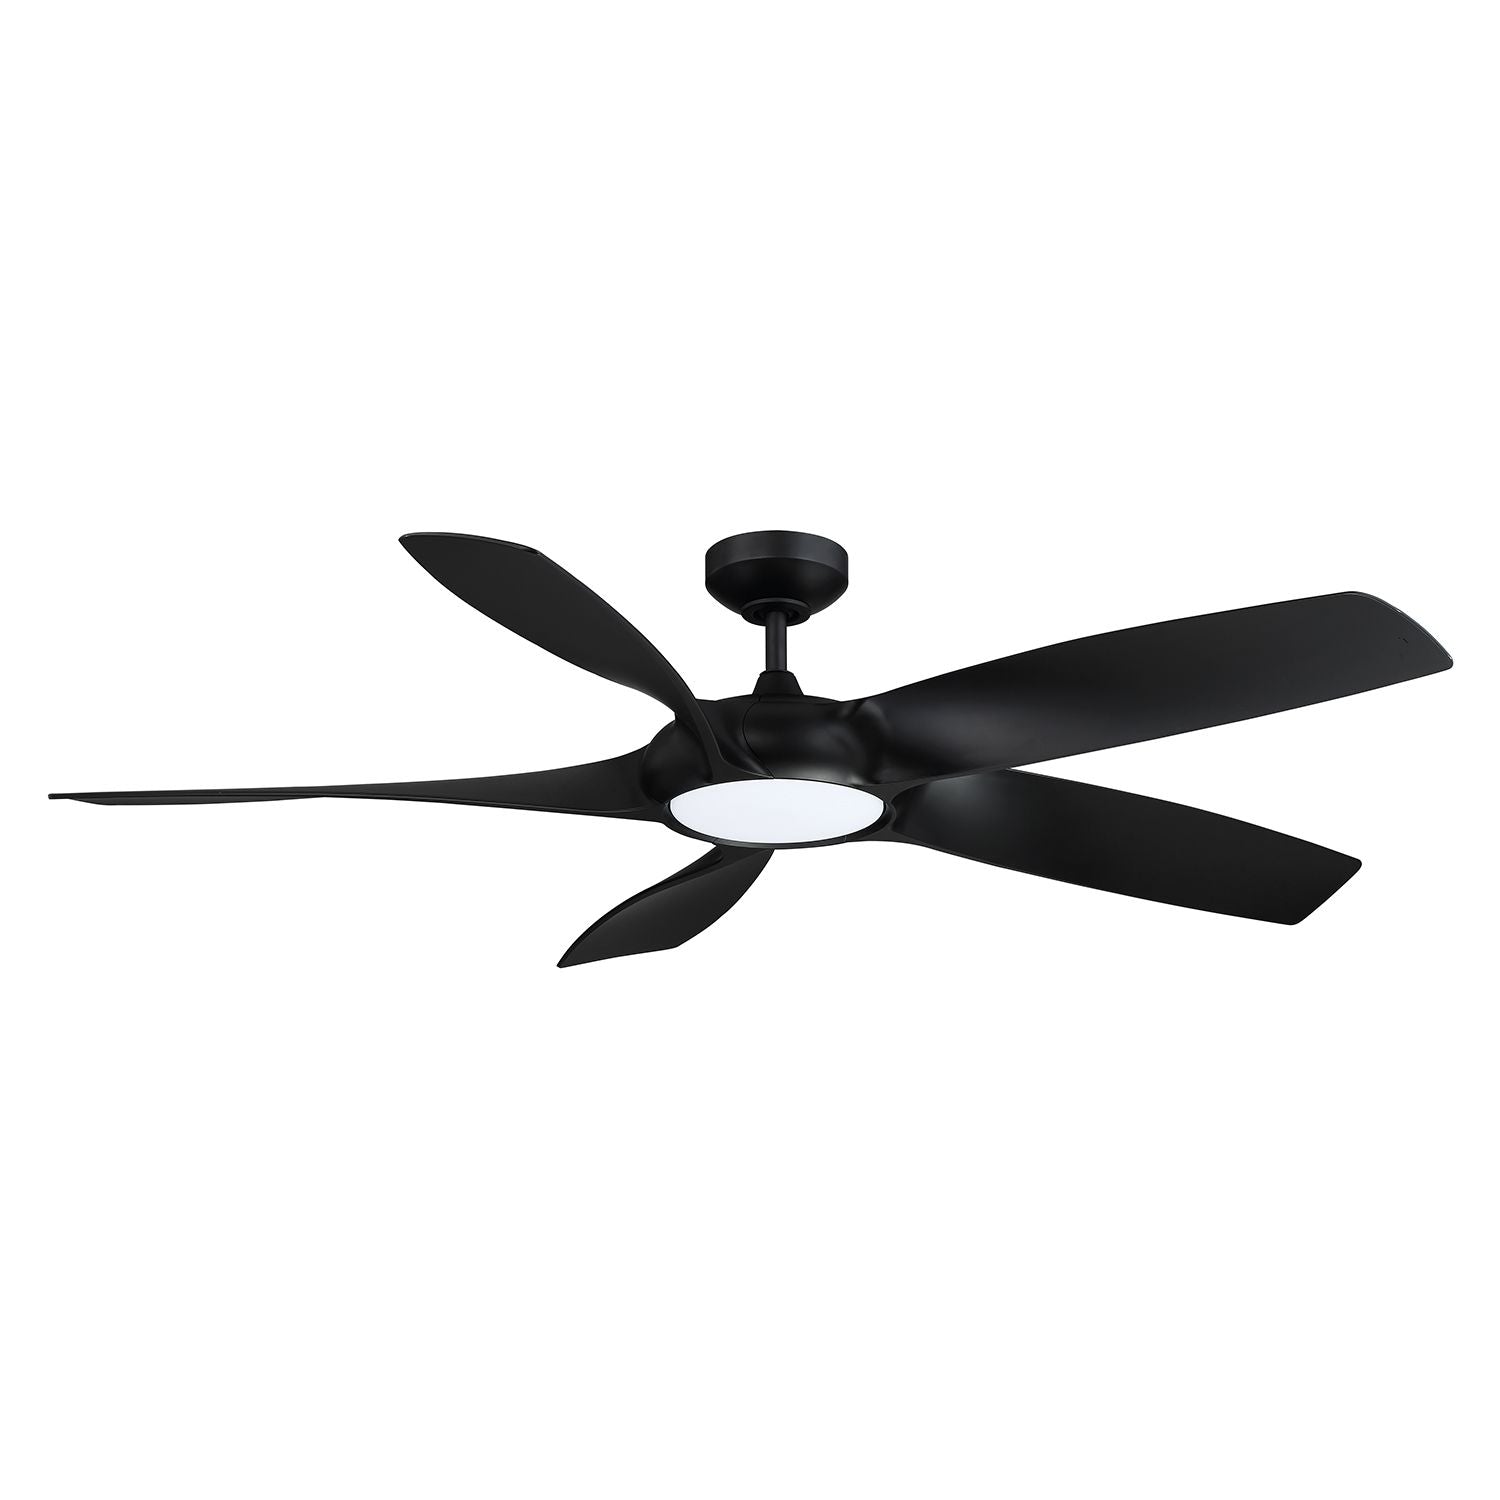 Blade Runner Ceiling Fan Black with matching blades